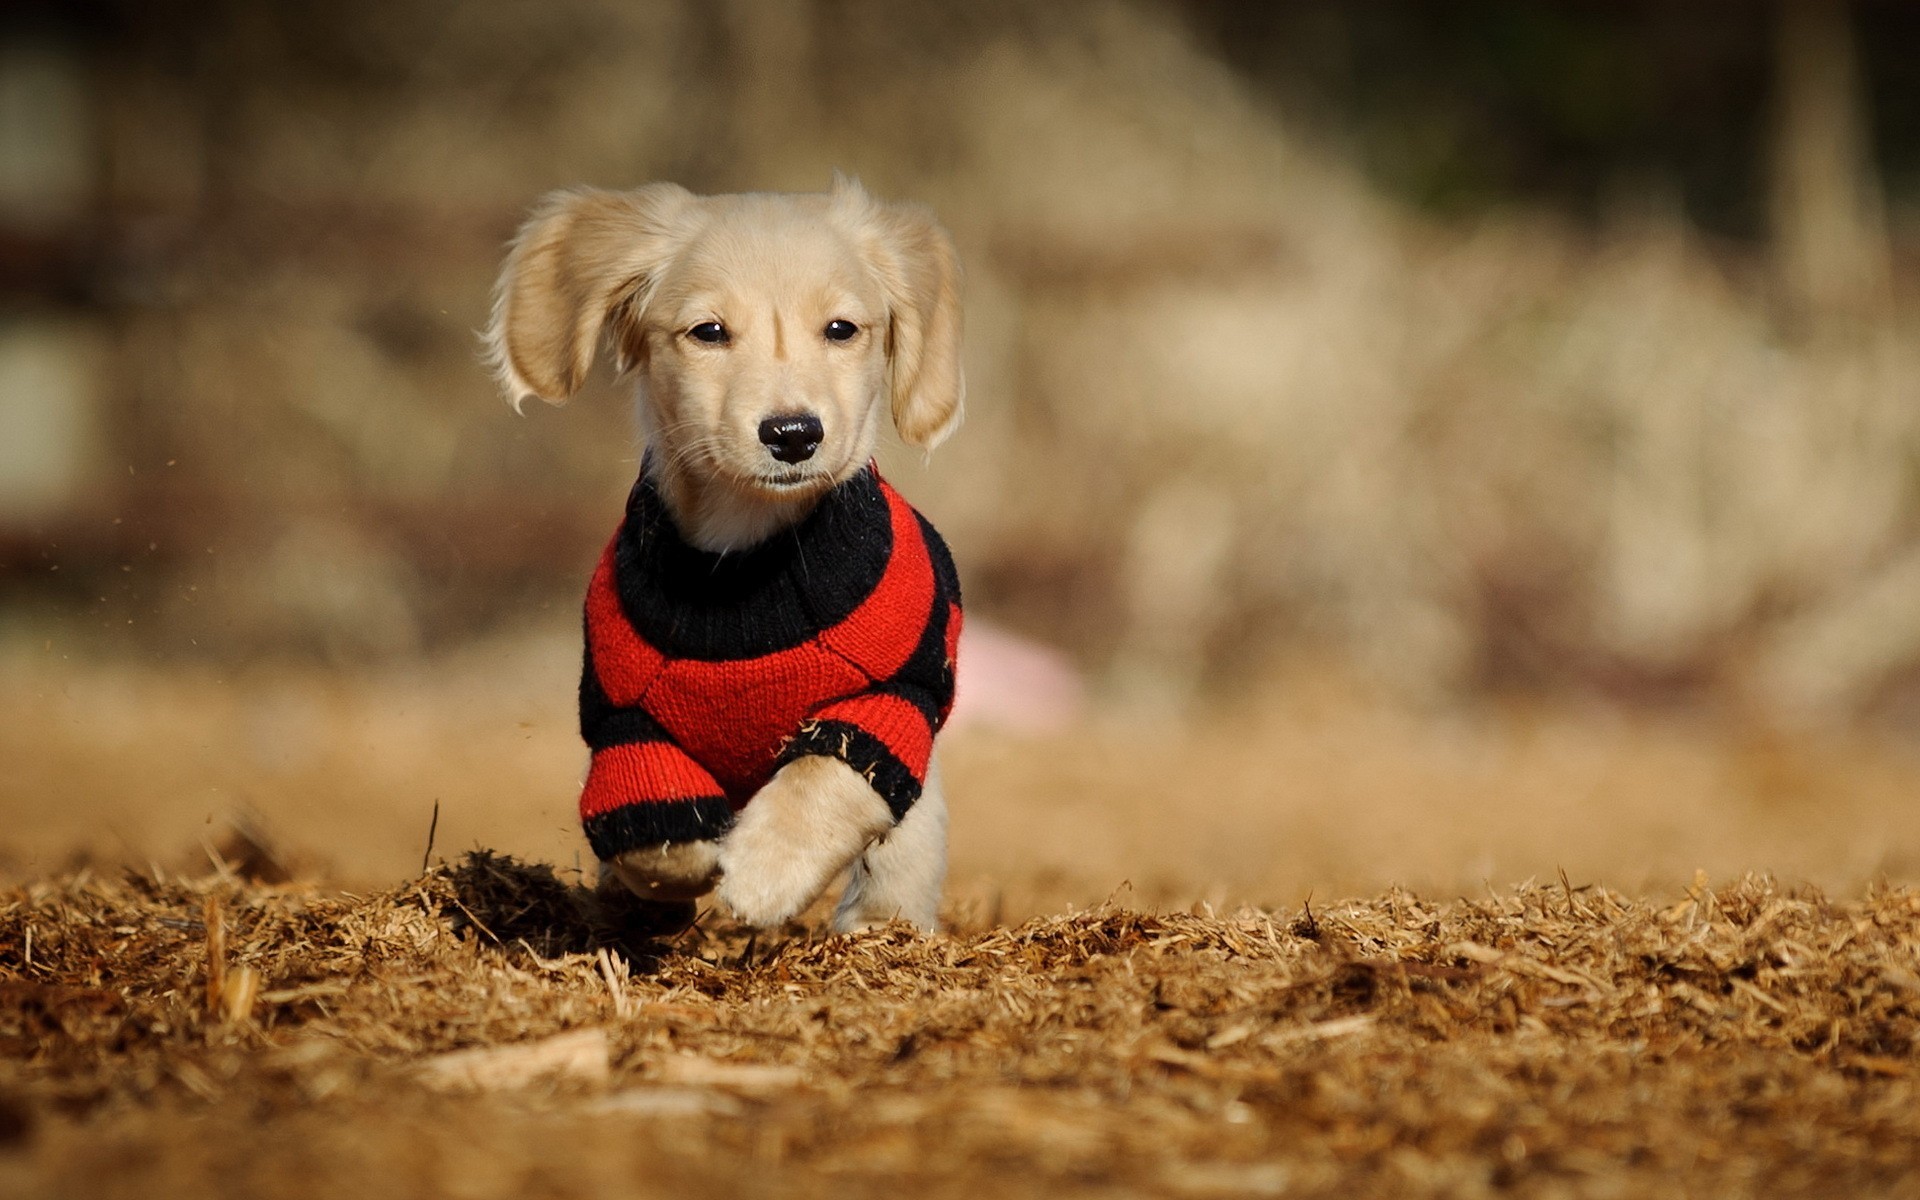 1920x1200 Animal Â· Clothed Cute Dog Â· Wallpapers For DesktopHd ...